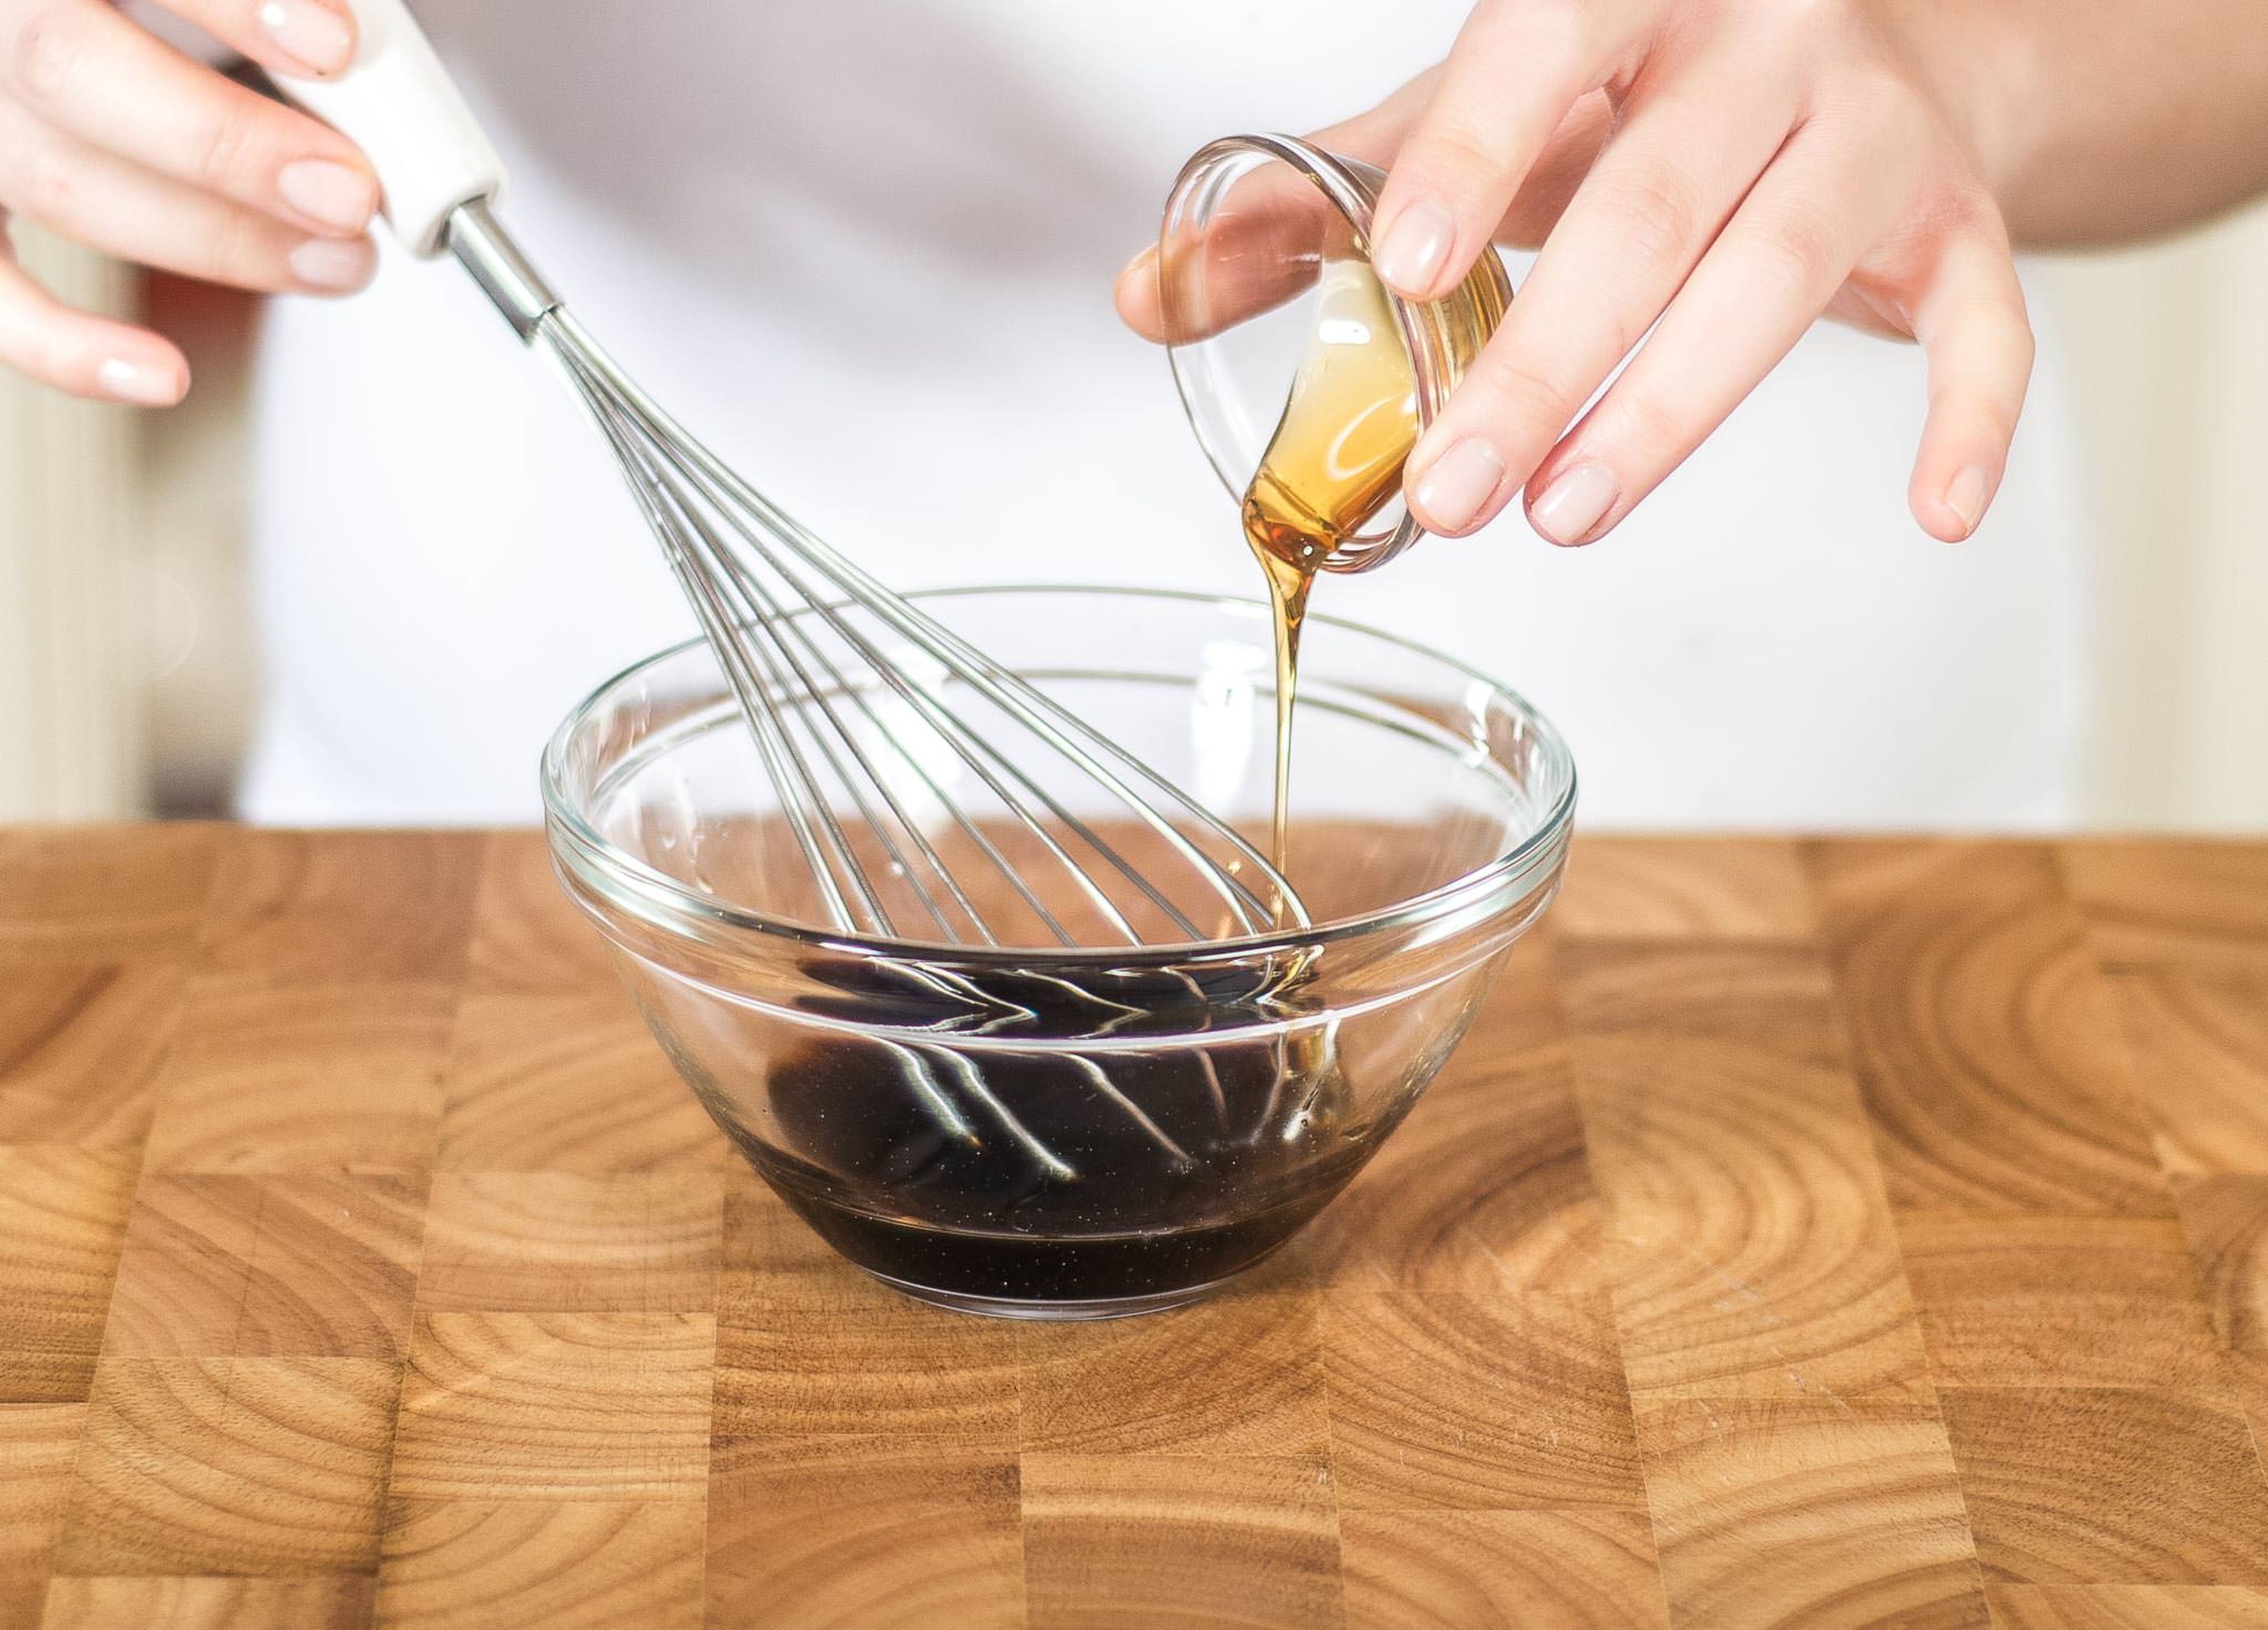 Mix soy sauce and honey to make a marinade.